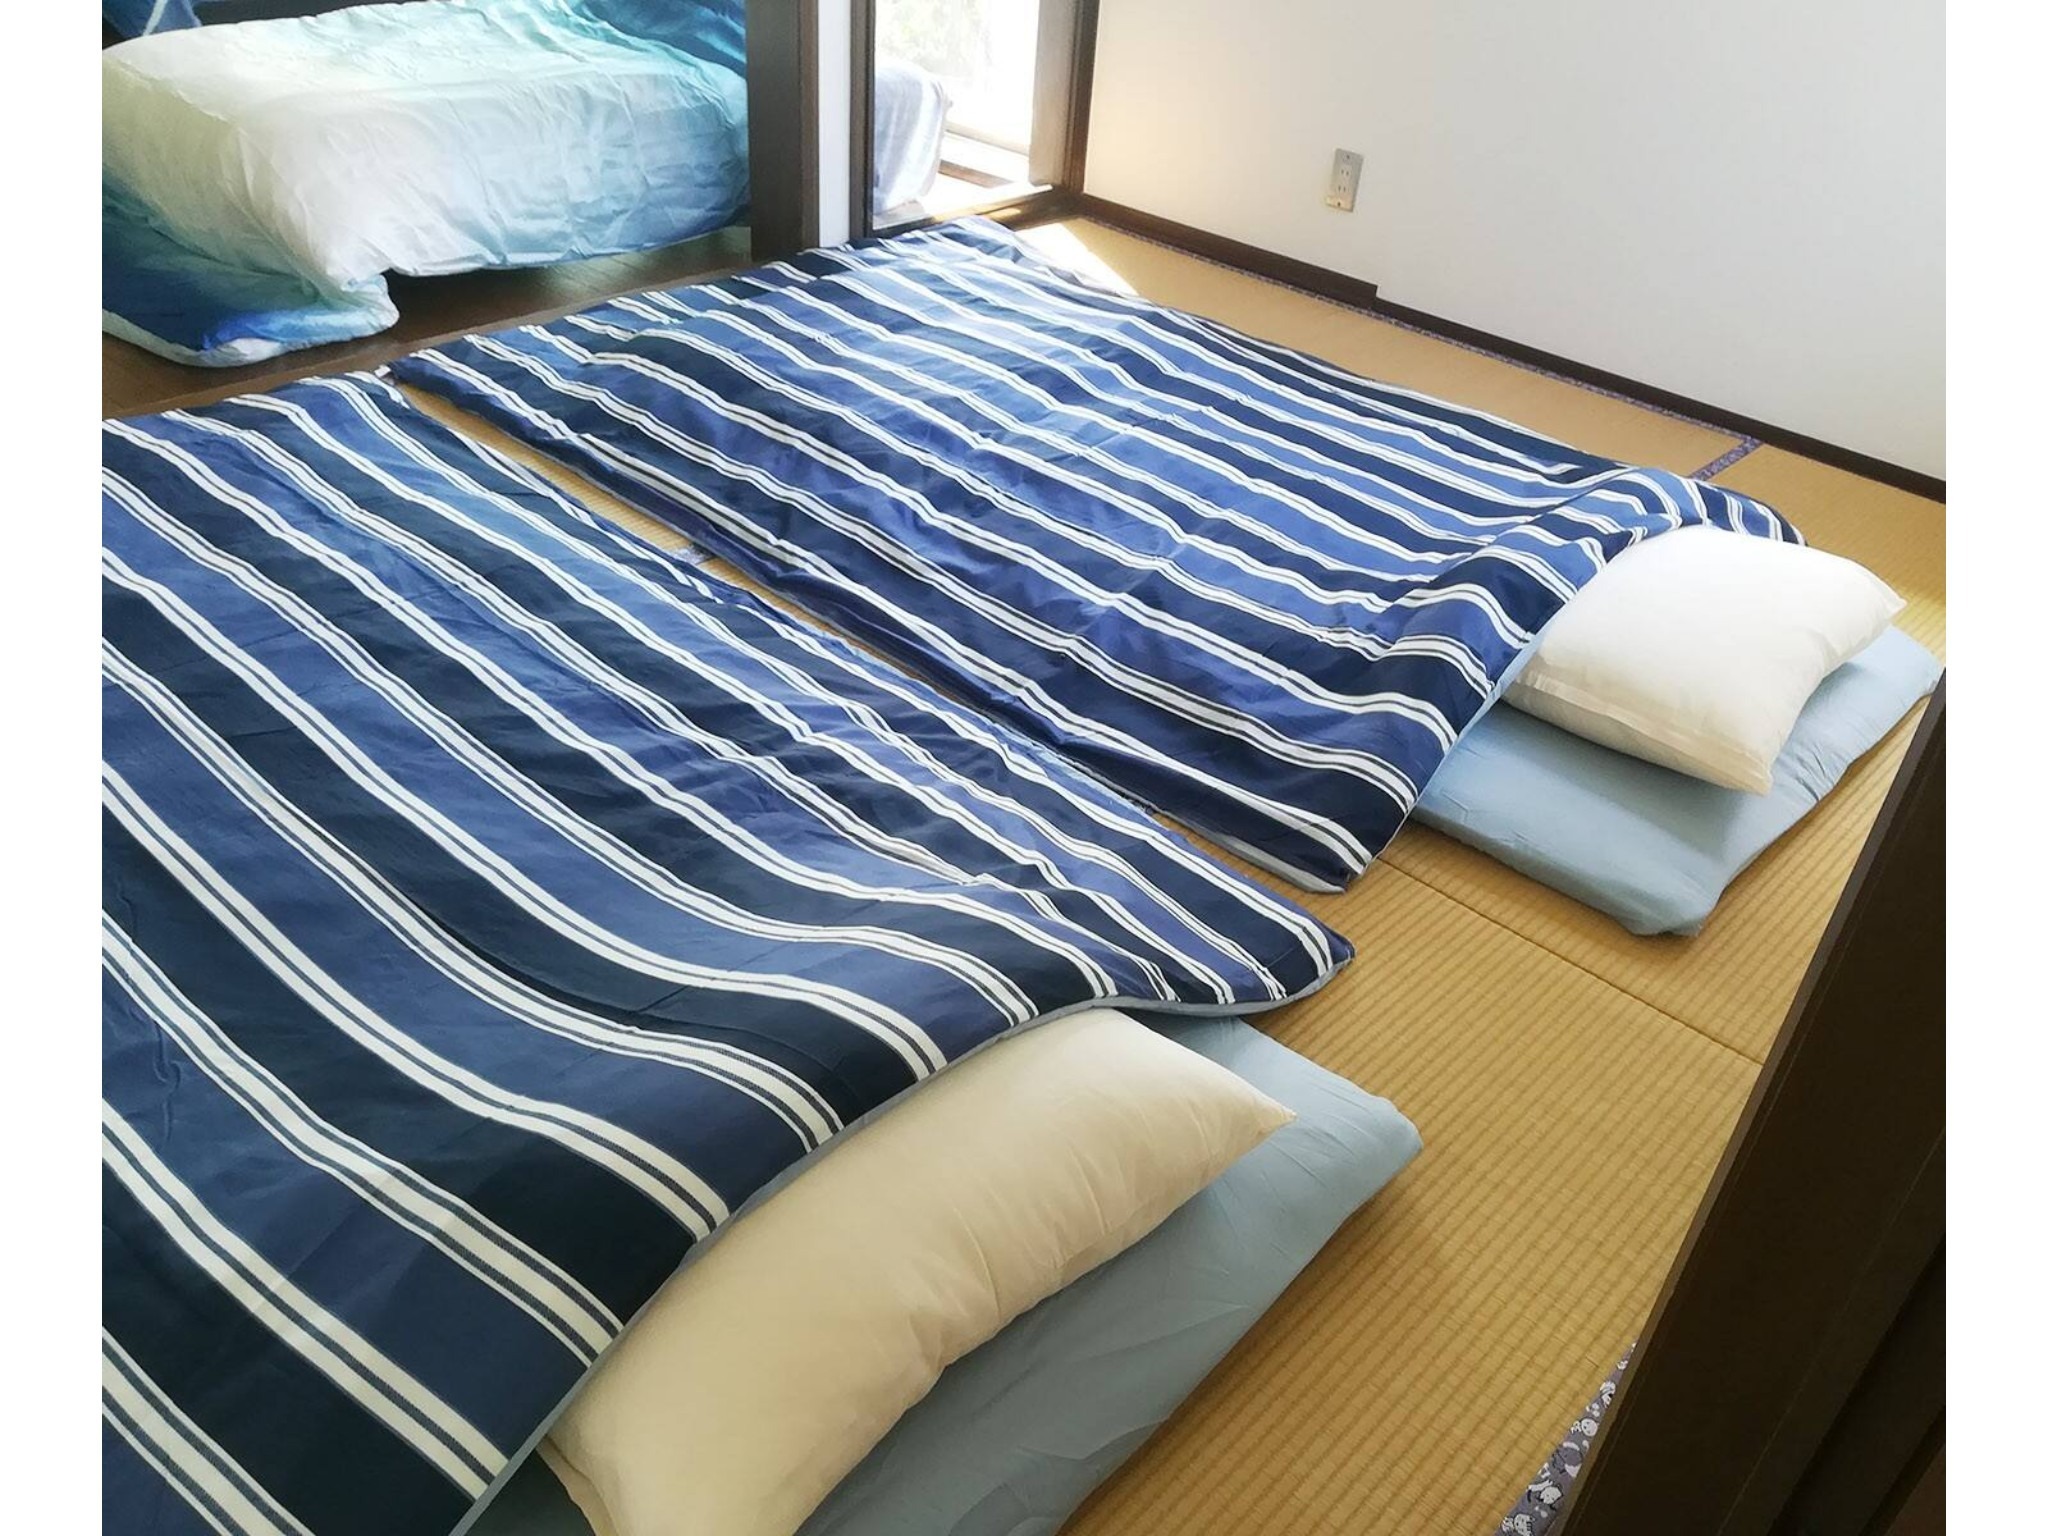 32 hours Stay at Luxury Hotel Lakefront Aozora 